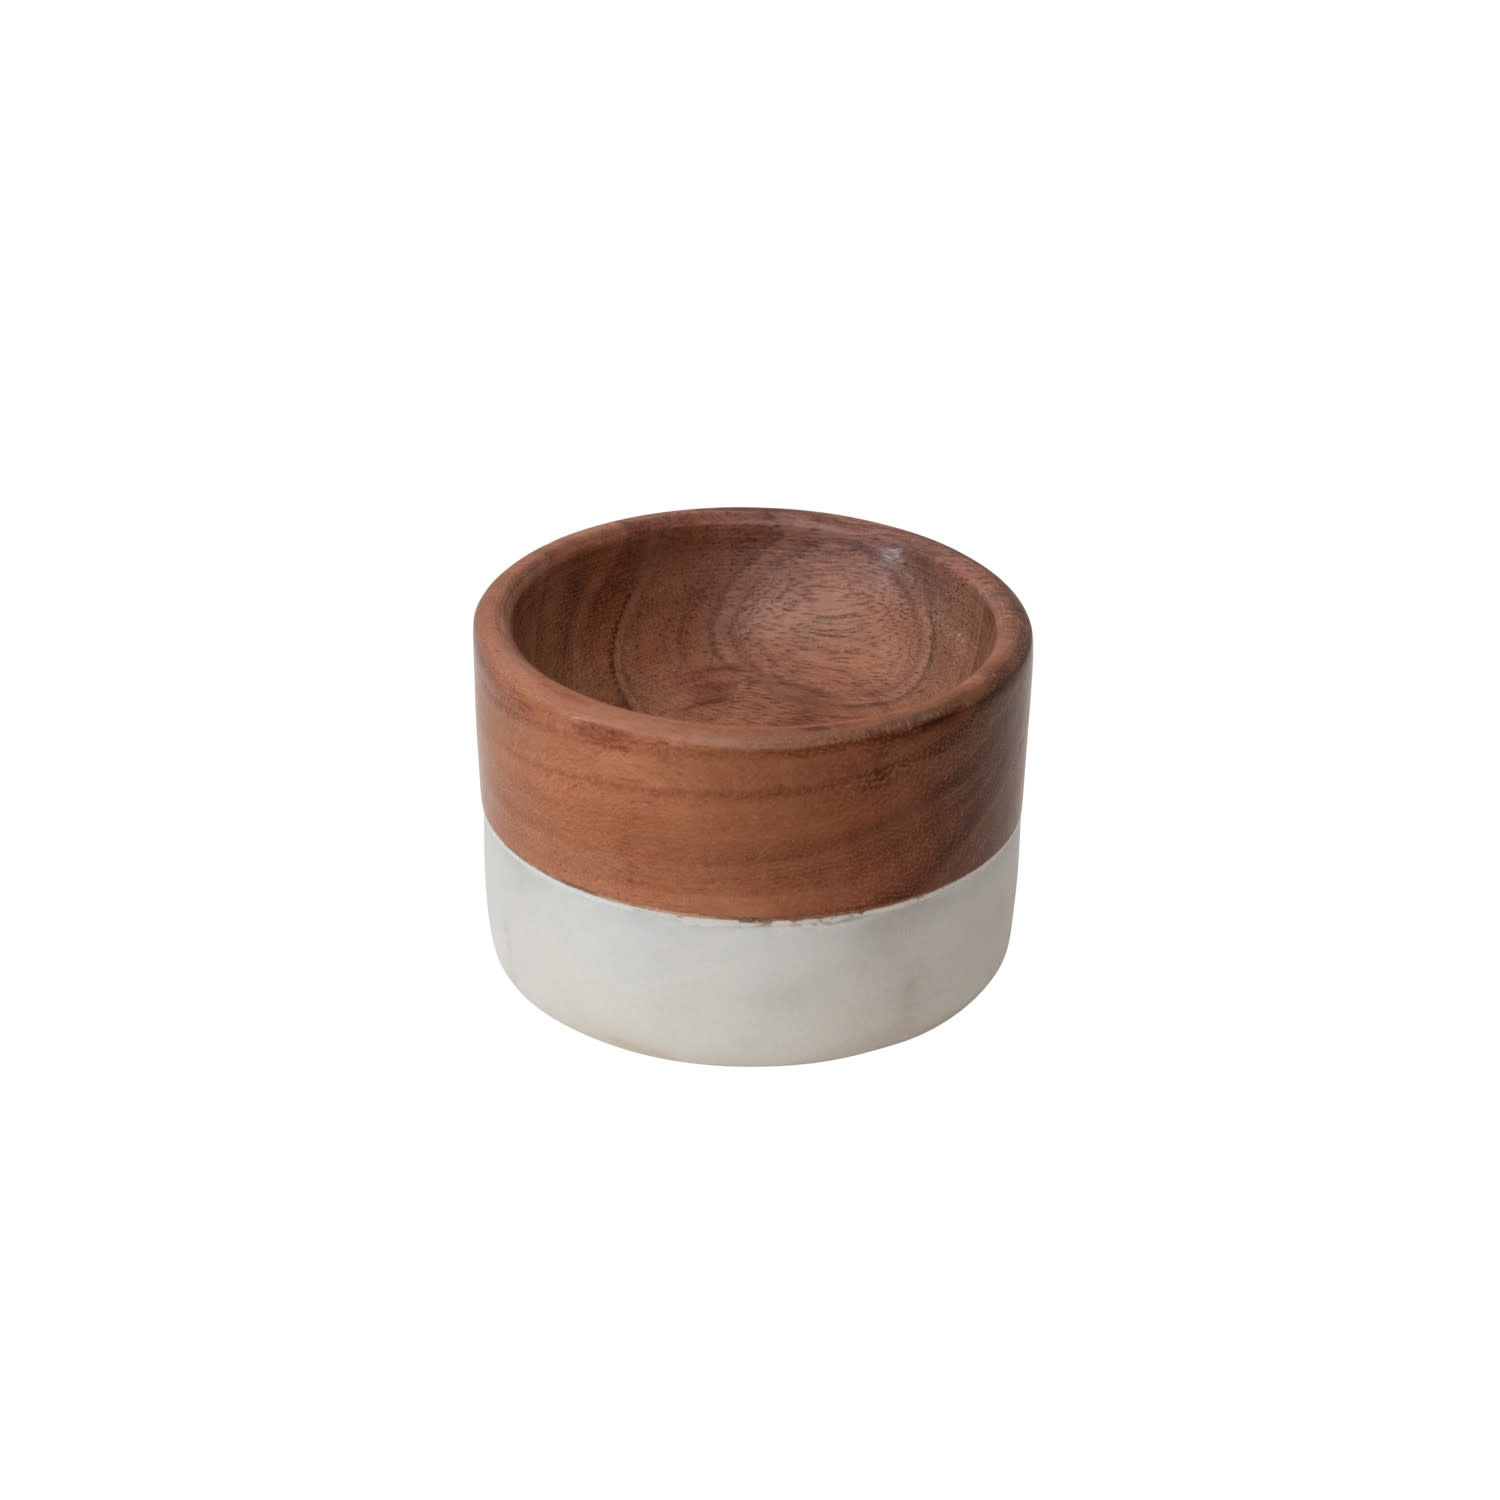 Marble & Acacia Wood Pinch Pot, Available for local pick up